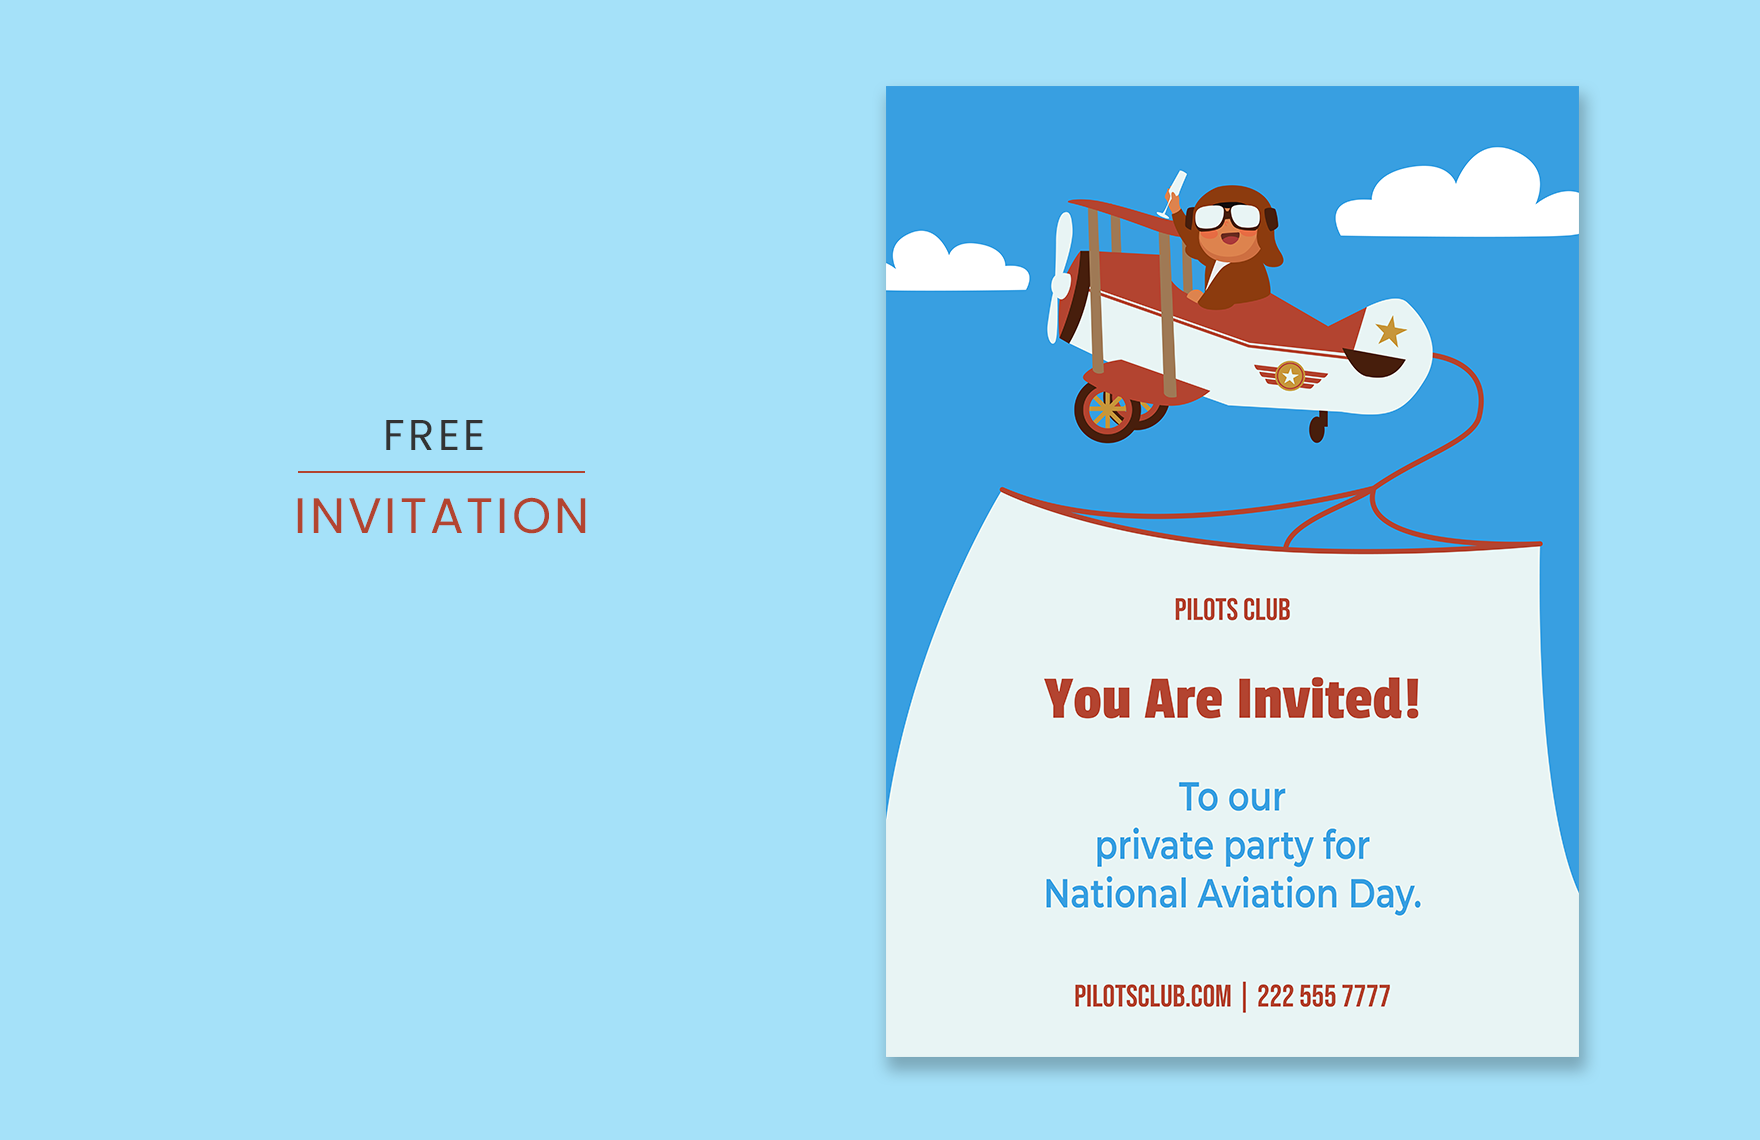 National Aviation Day Invitation Template in PDF, Illustrator, SVG, PNG